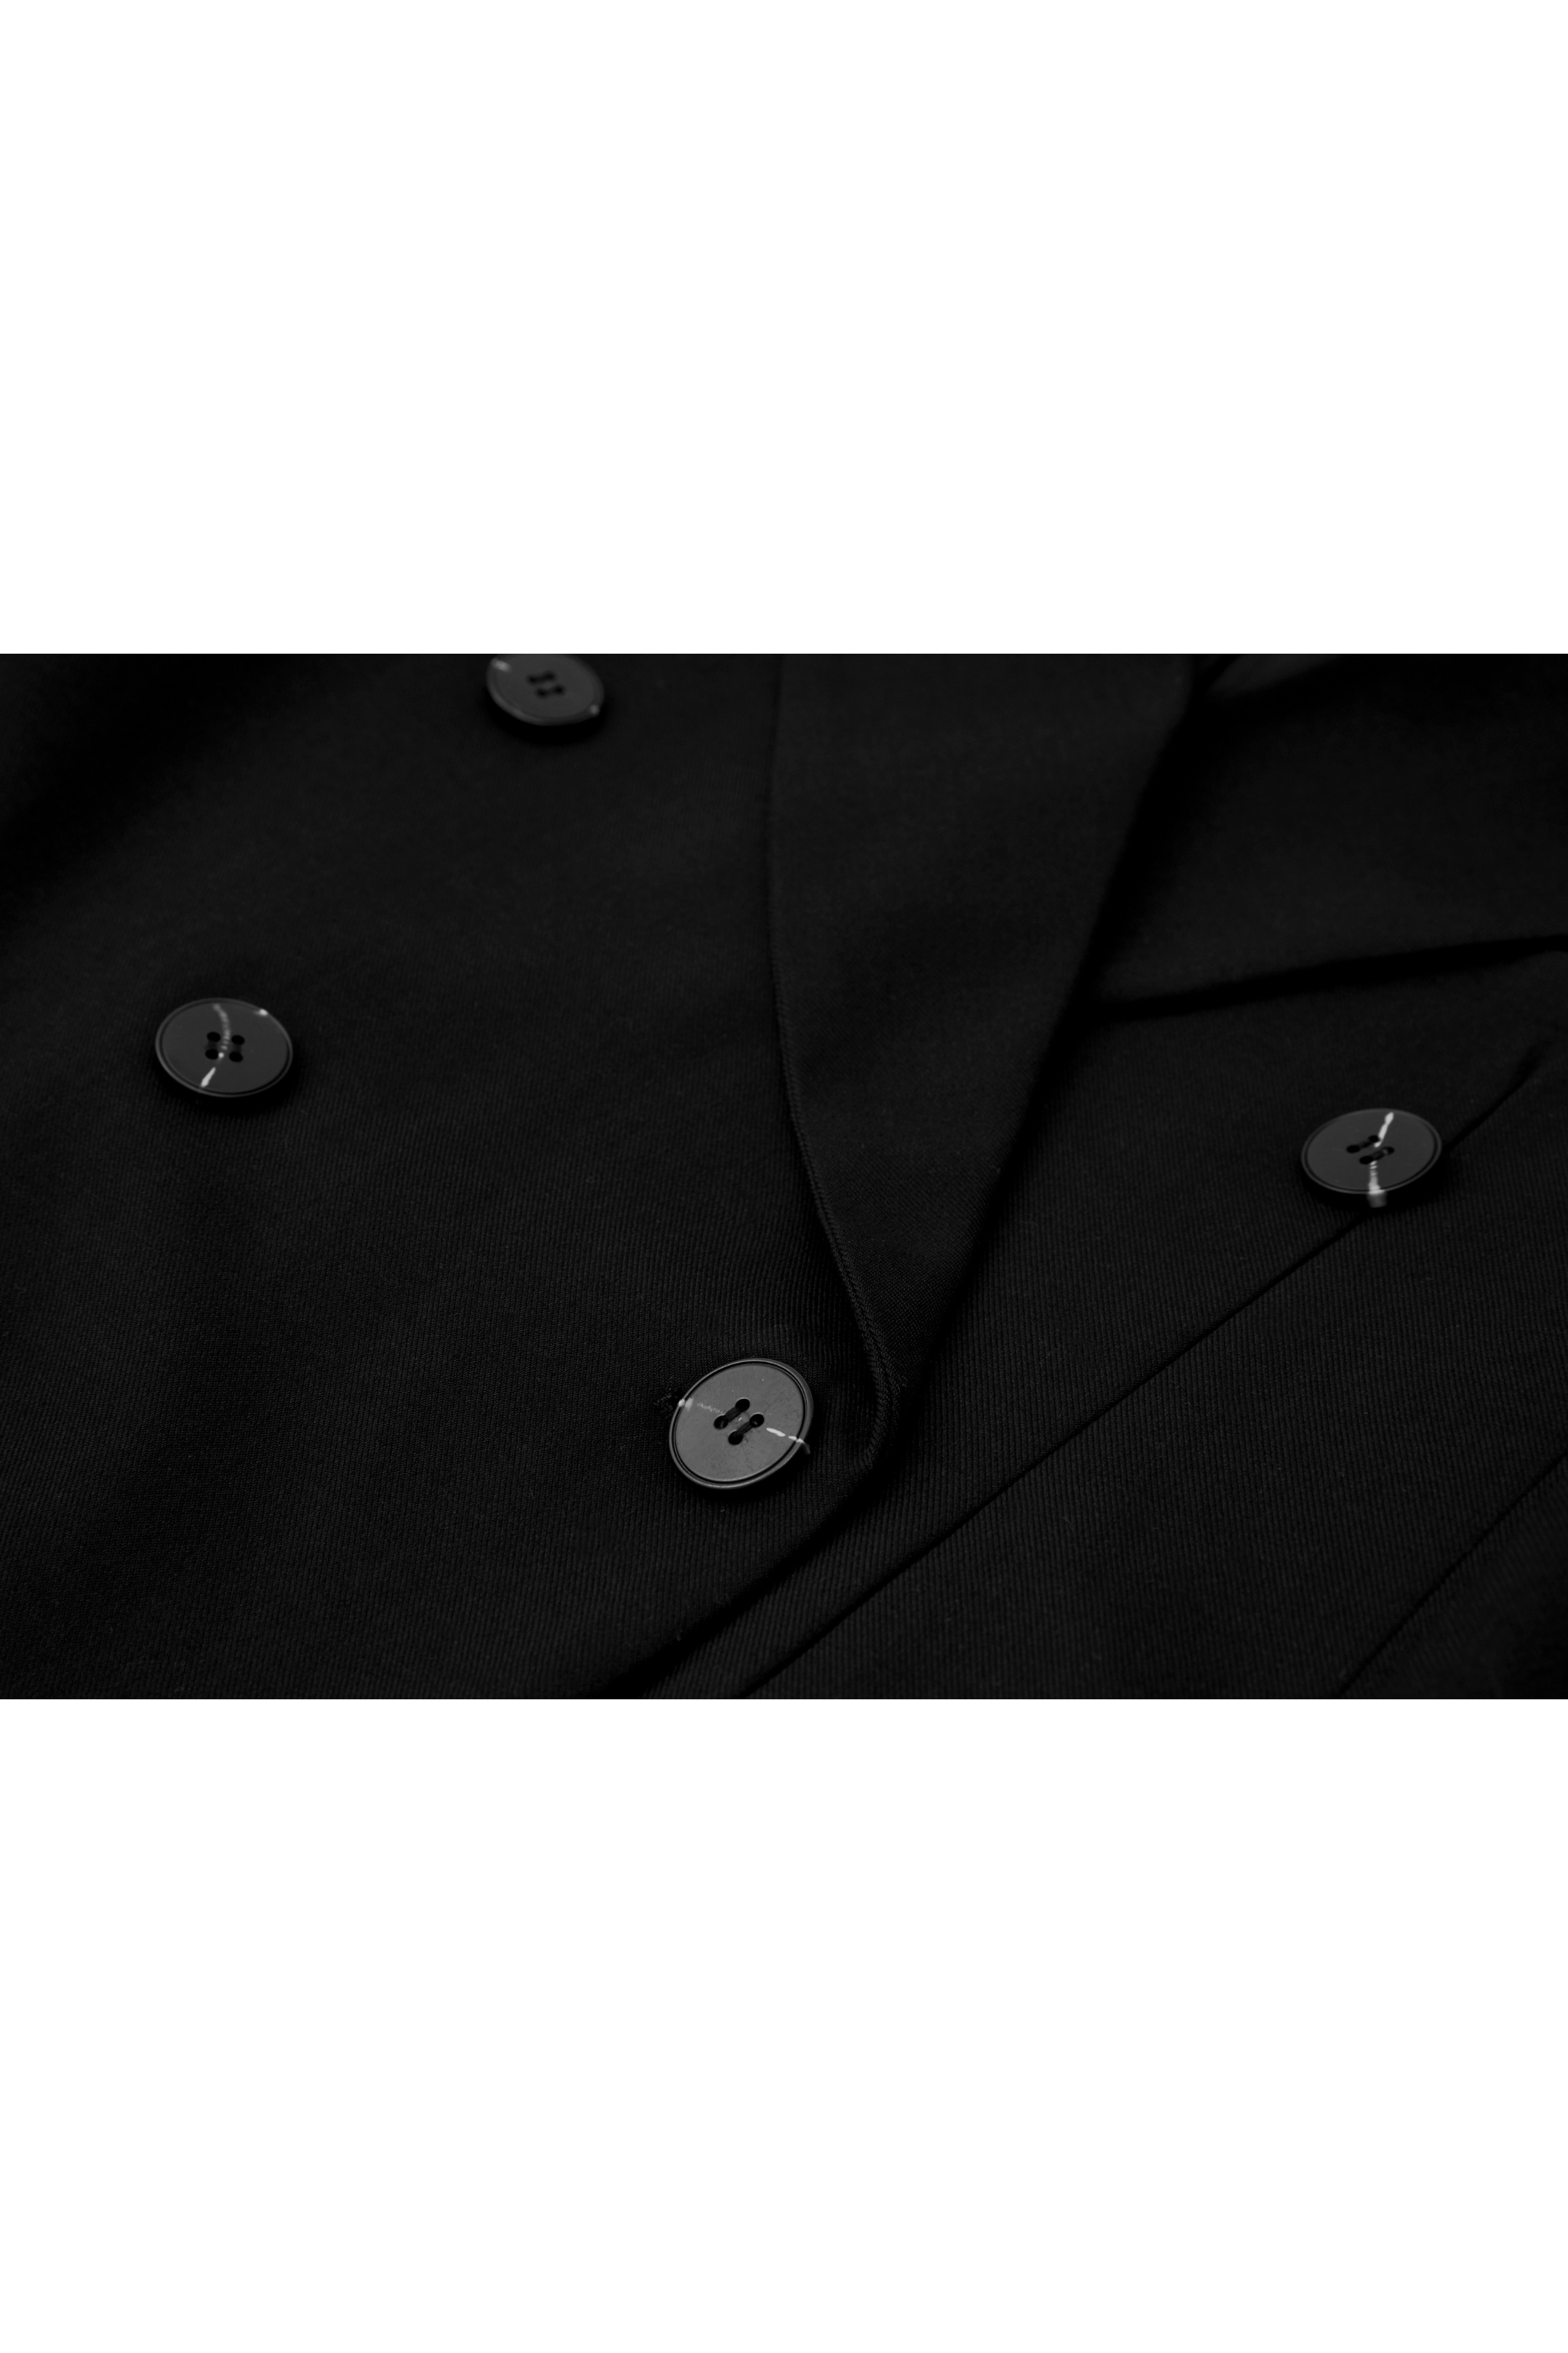 DOUBLE BREASTED SLIM JACKET / ダブルブレストスリムジャケット